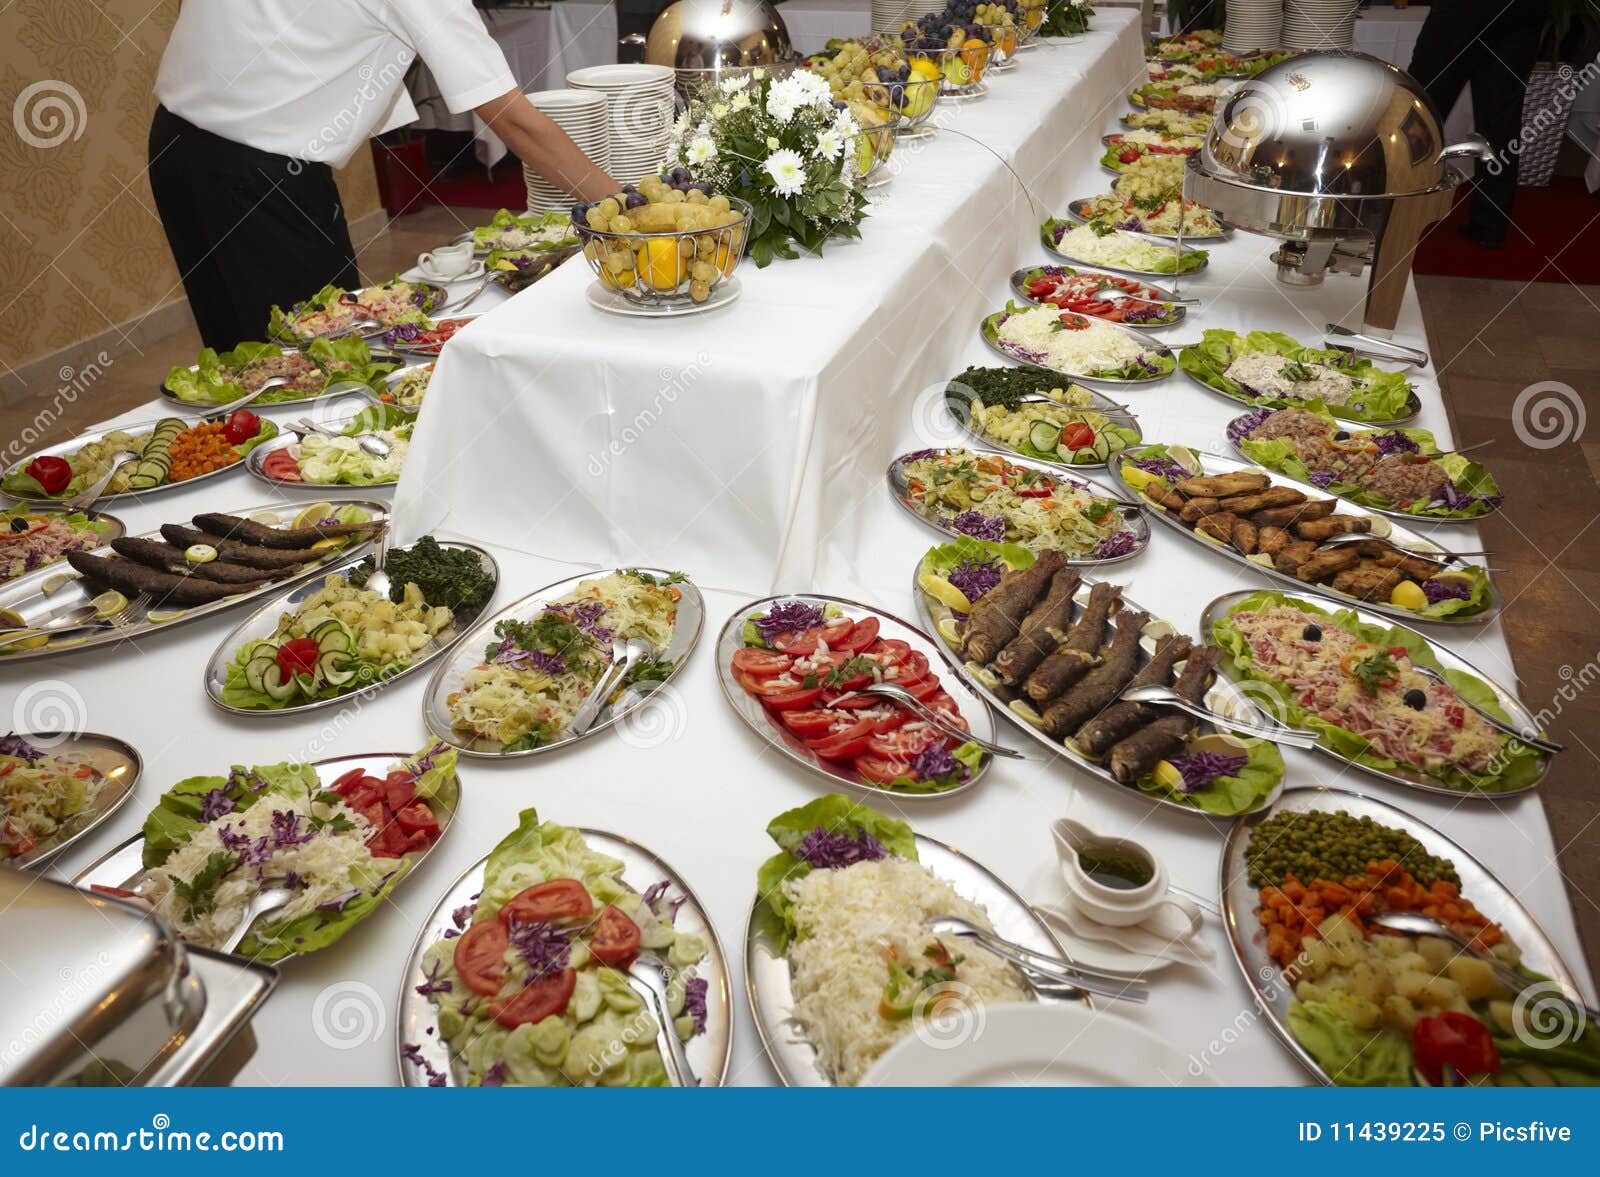 Food catering business plan